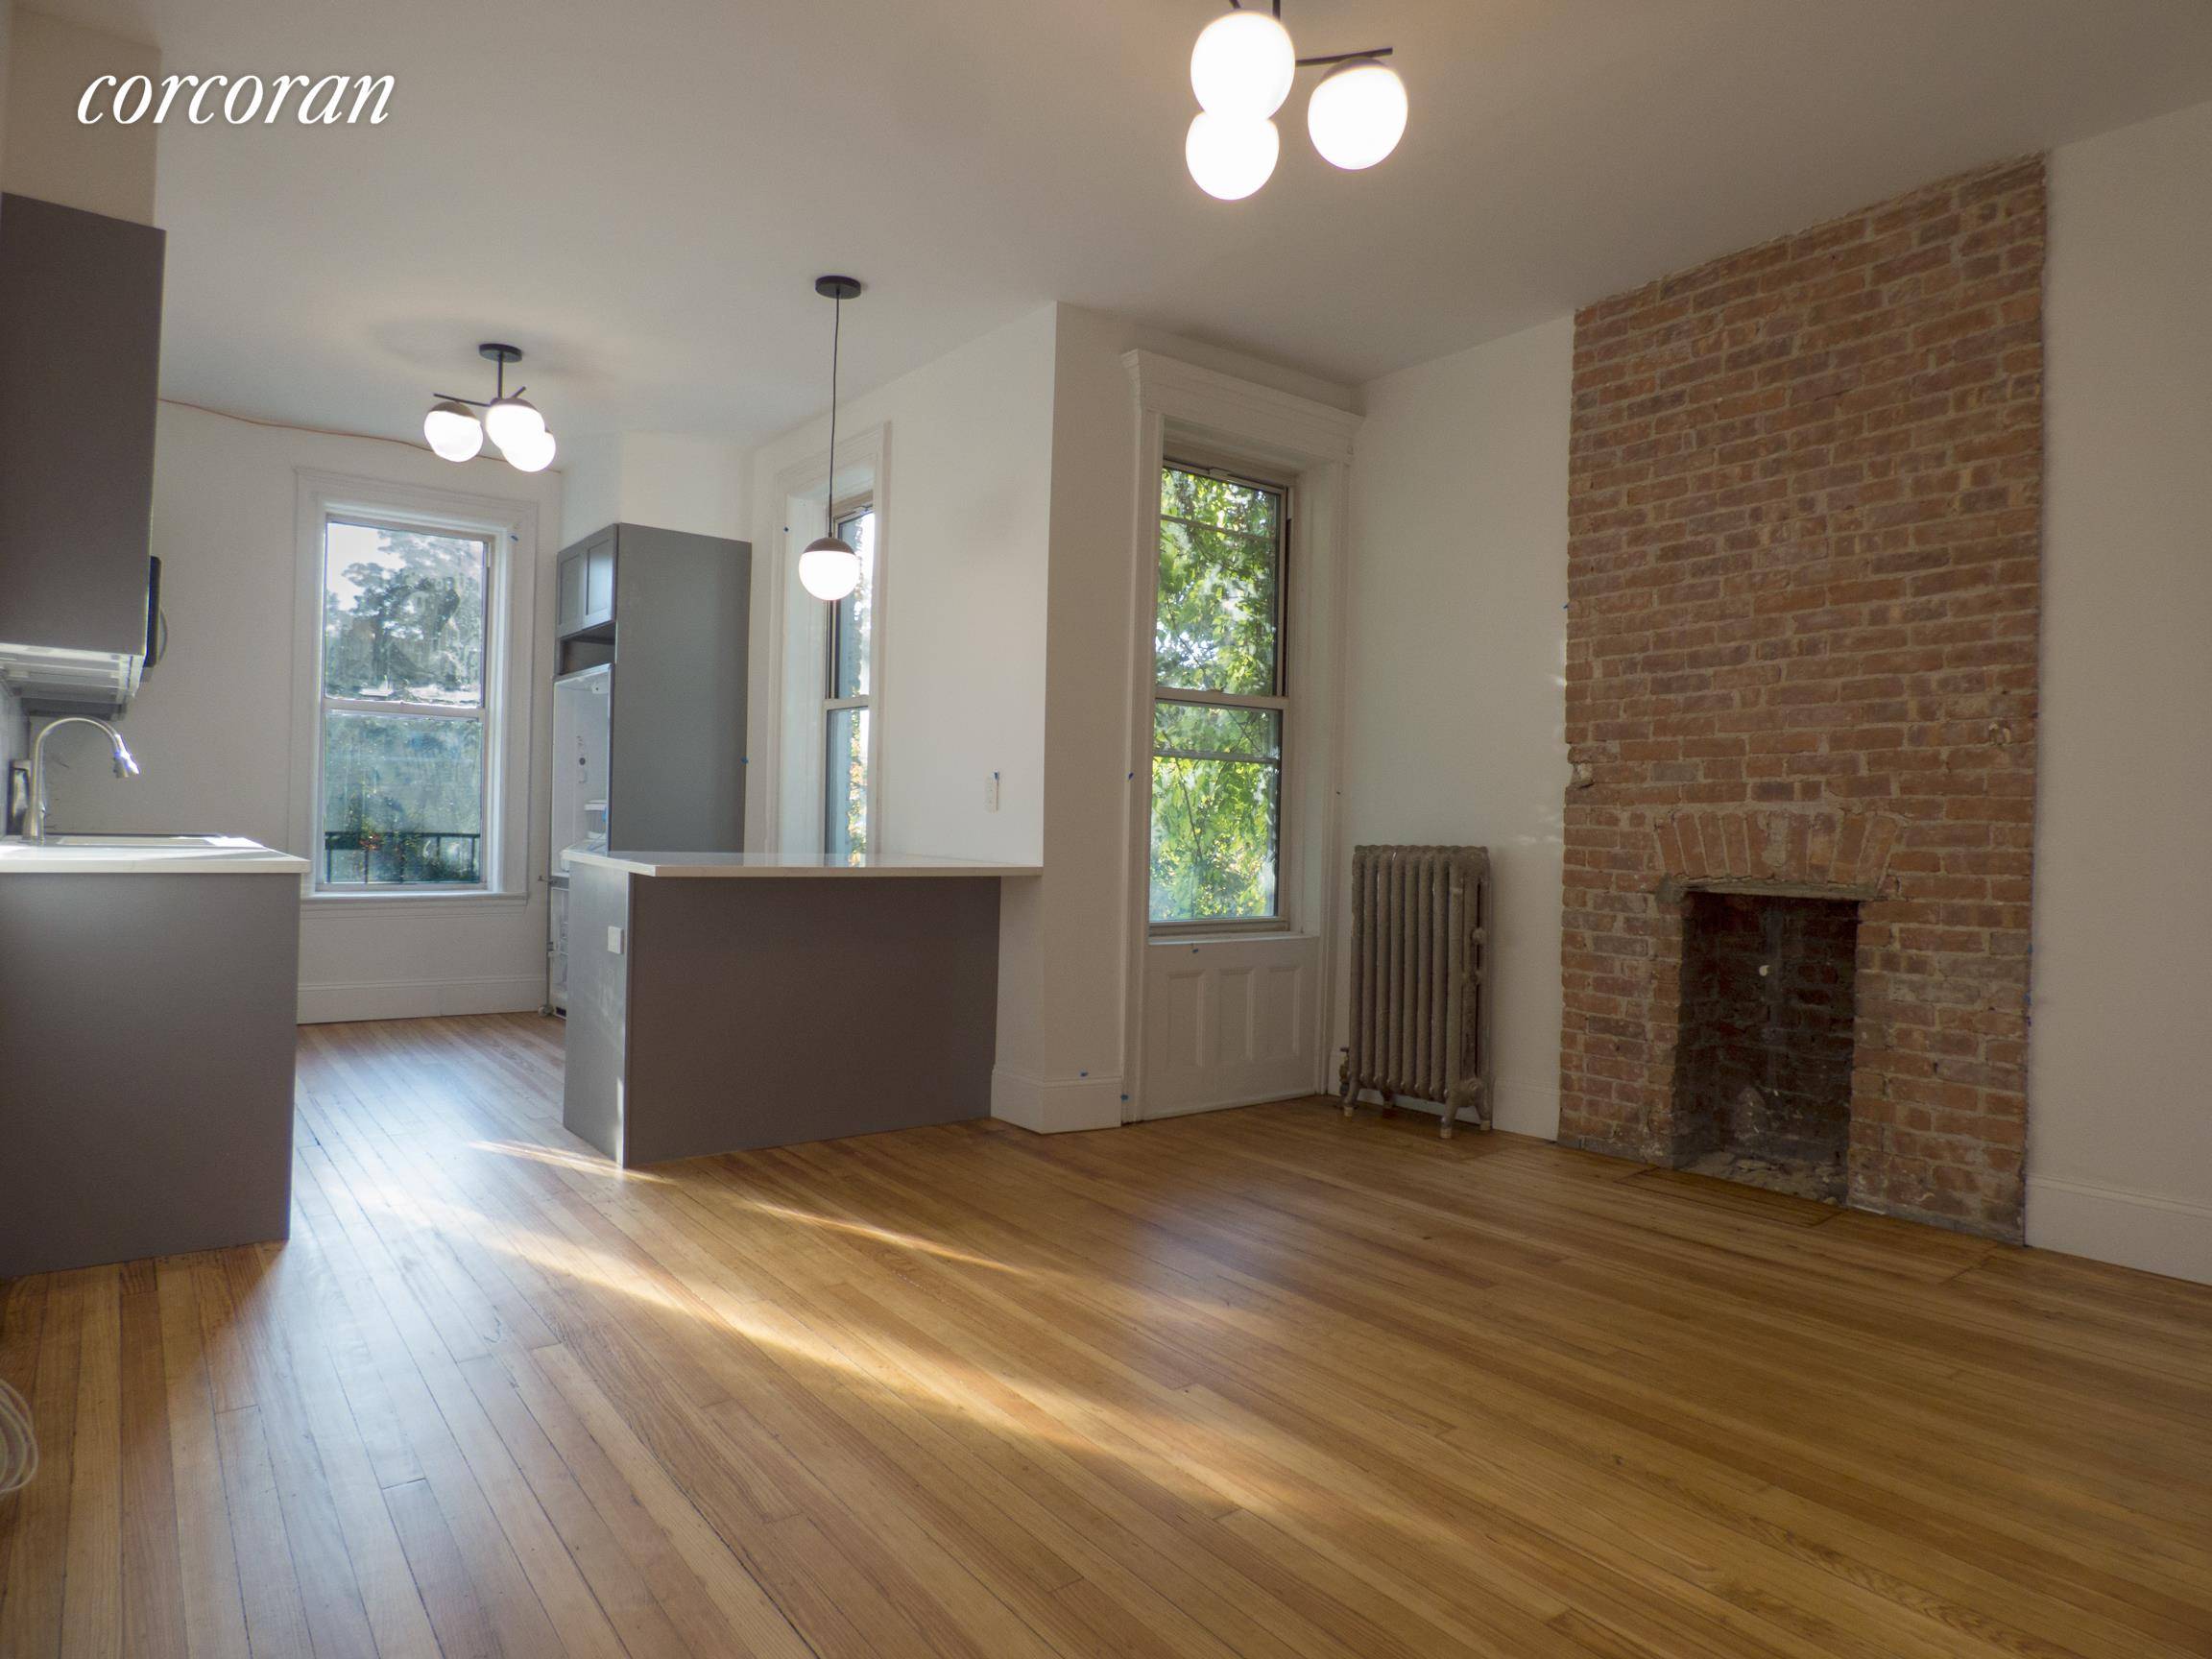 INCREDIBLE 1700 sq ft FULL FLOOR FOUR BEDROOM HOME OFFICE residence in an intimate four unit building in Park Slope.